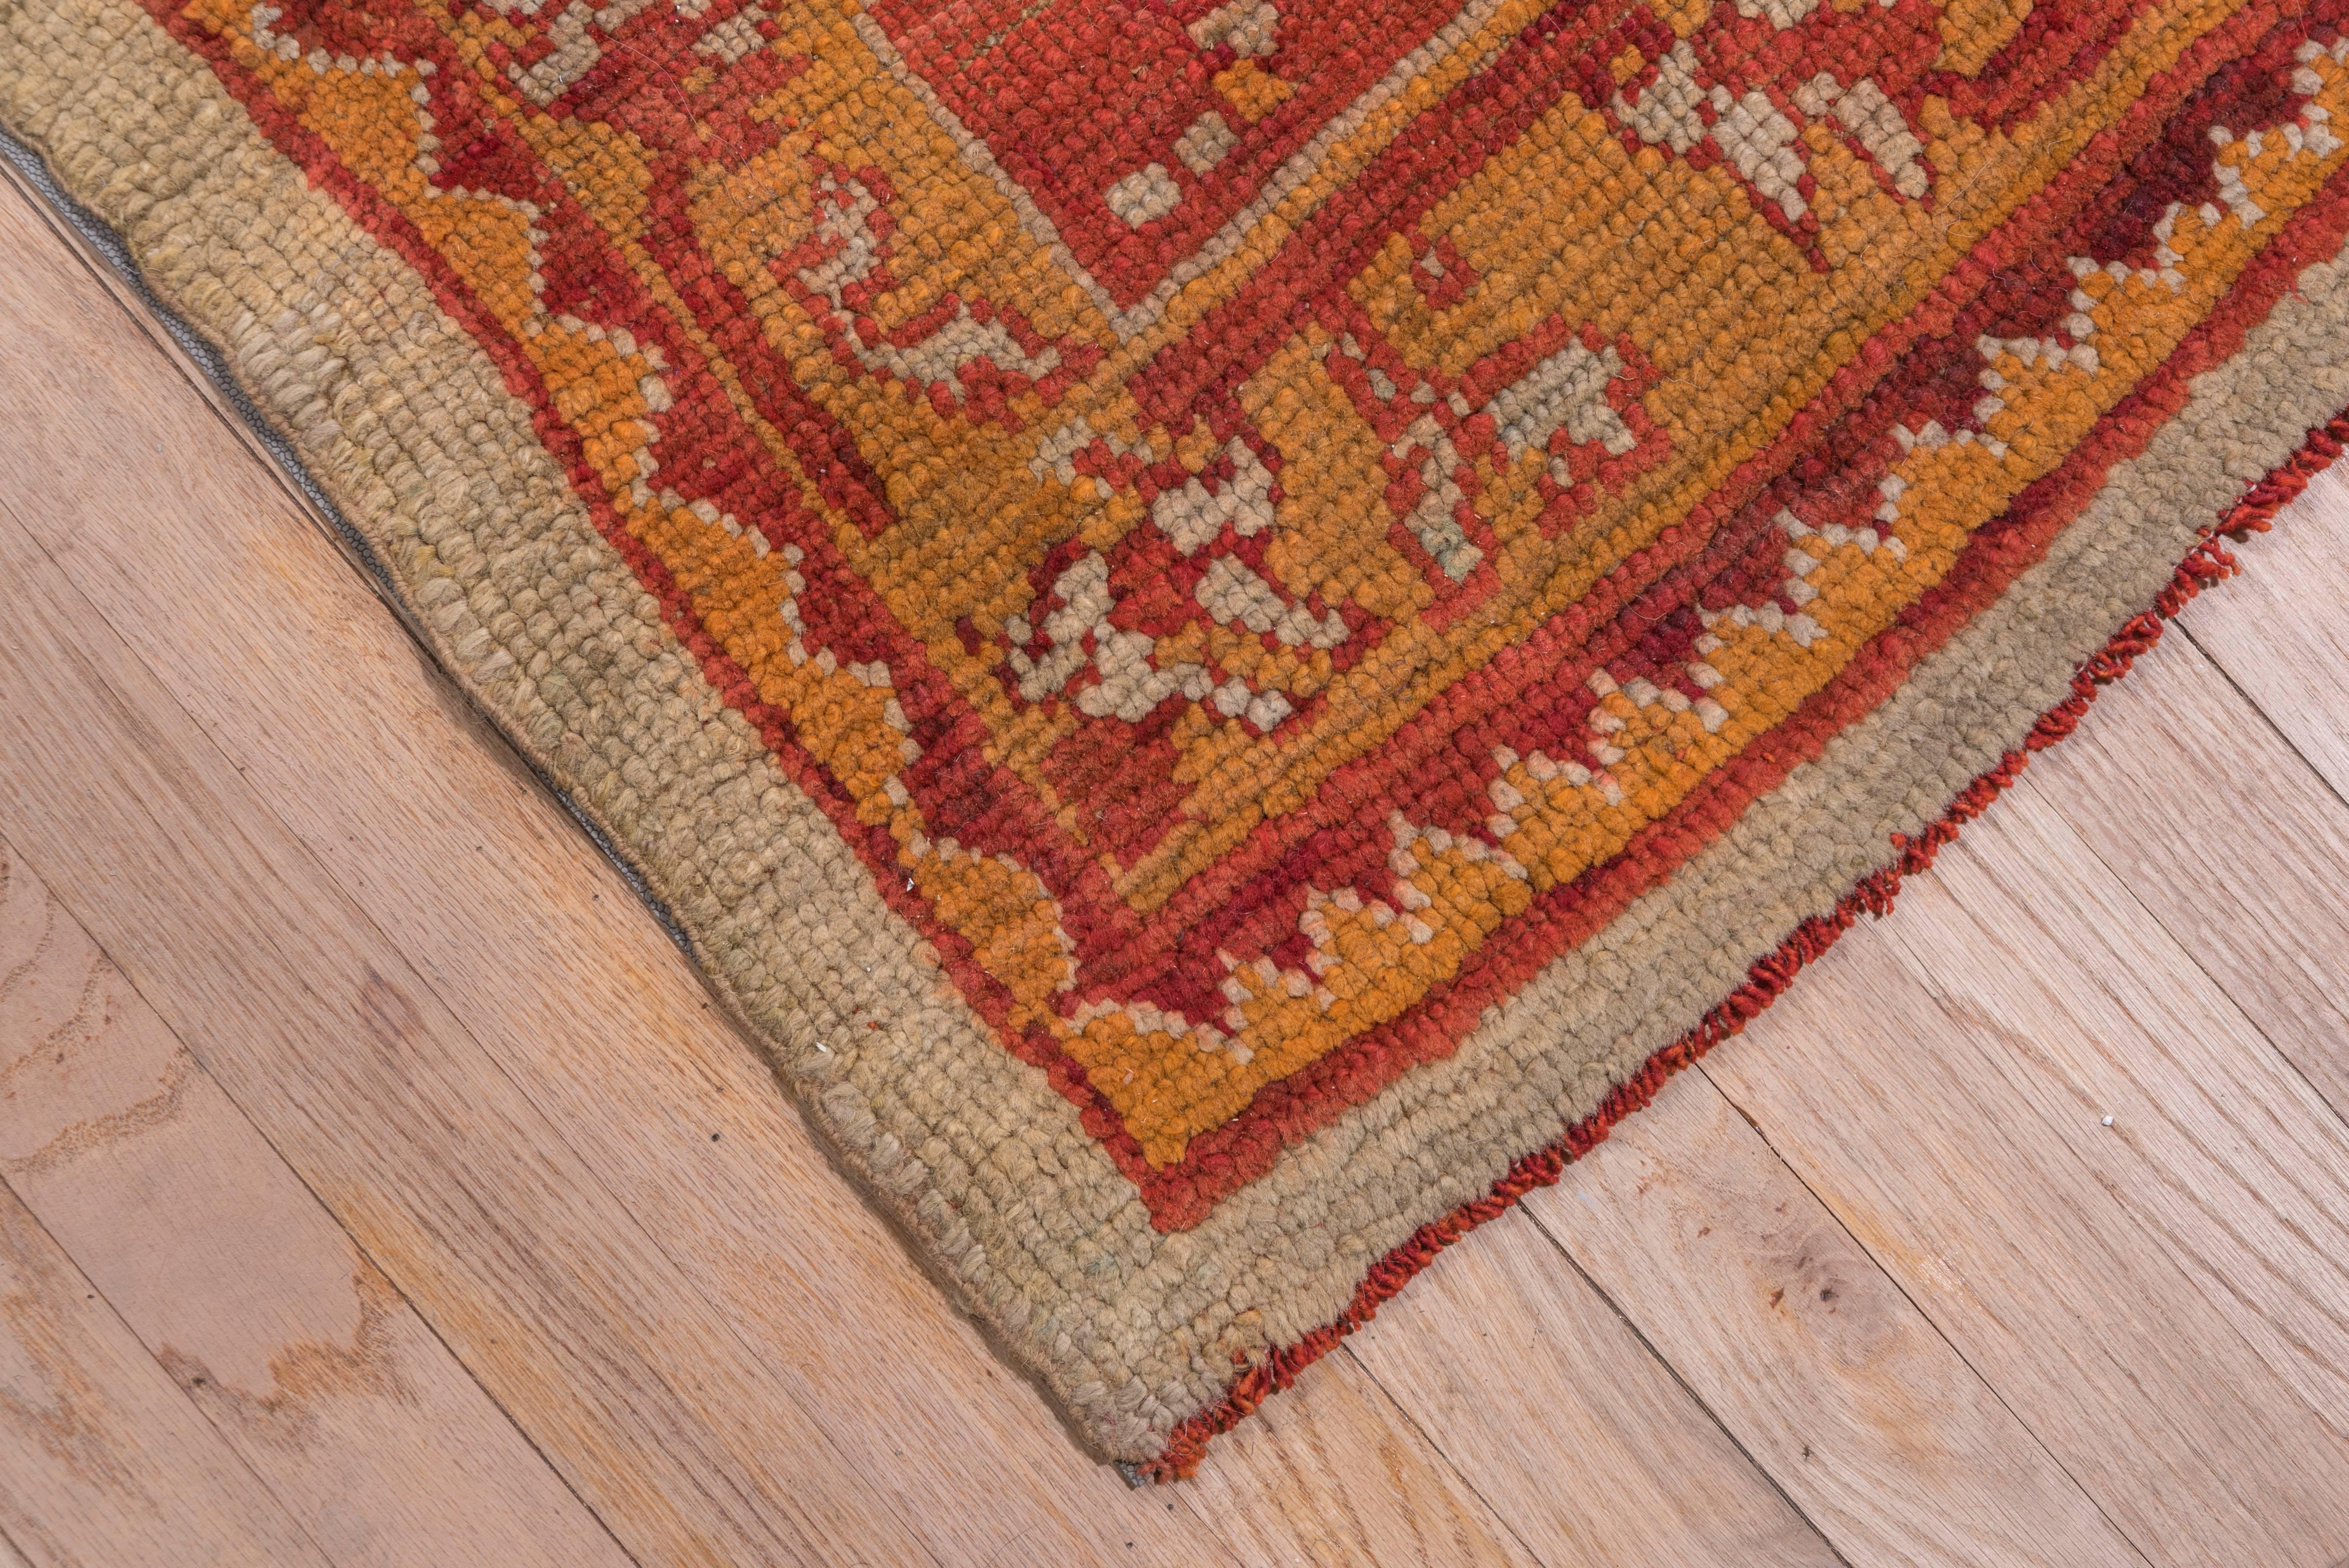 This west Anatolian workshop carpet retains some of its classical forebears with its oval, flamed-edged oval ivory medallion and arabesque defined ivory corners. The orange-gold tracery on the pale green ground also traces back to early ottoman